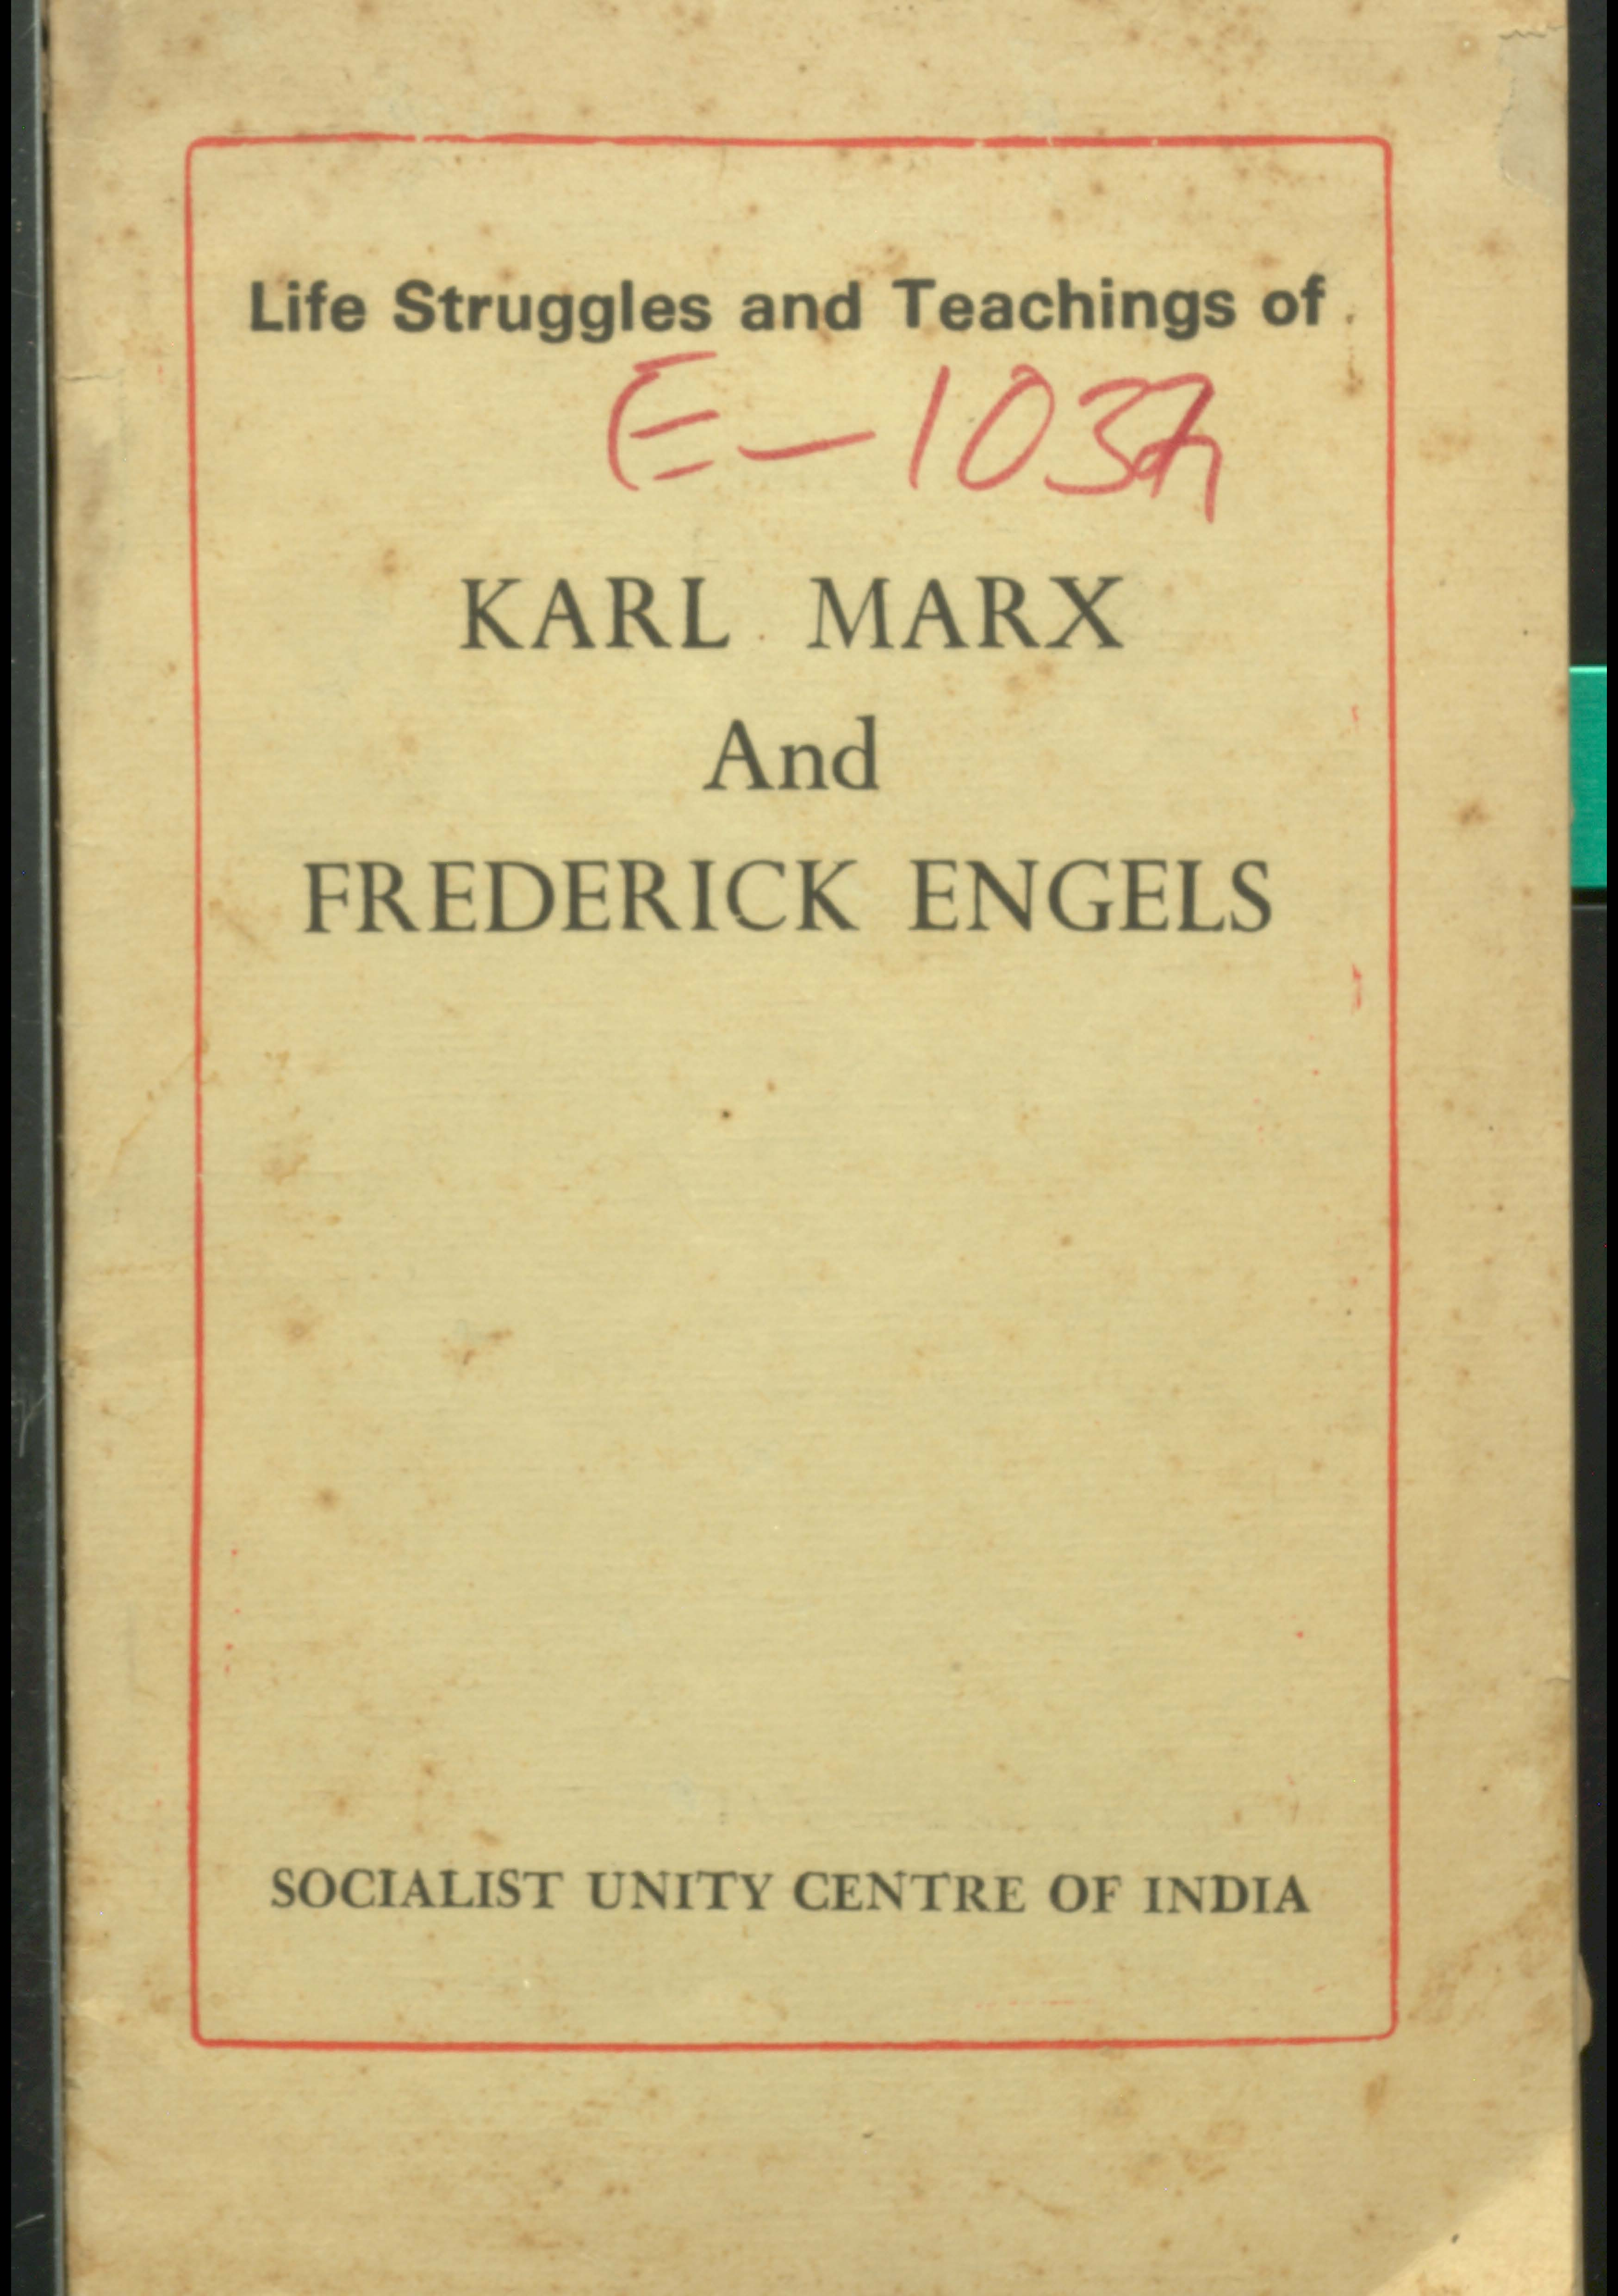 LIFE struggles and teachings of karl marxand frederick engels